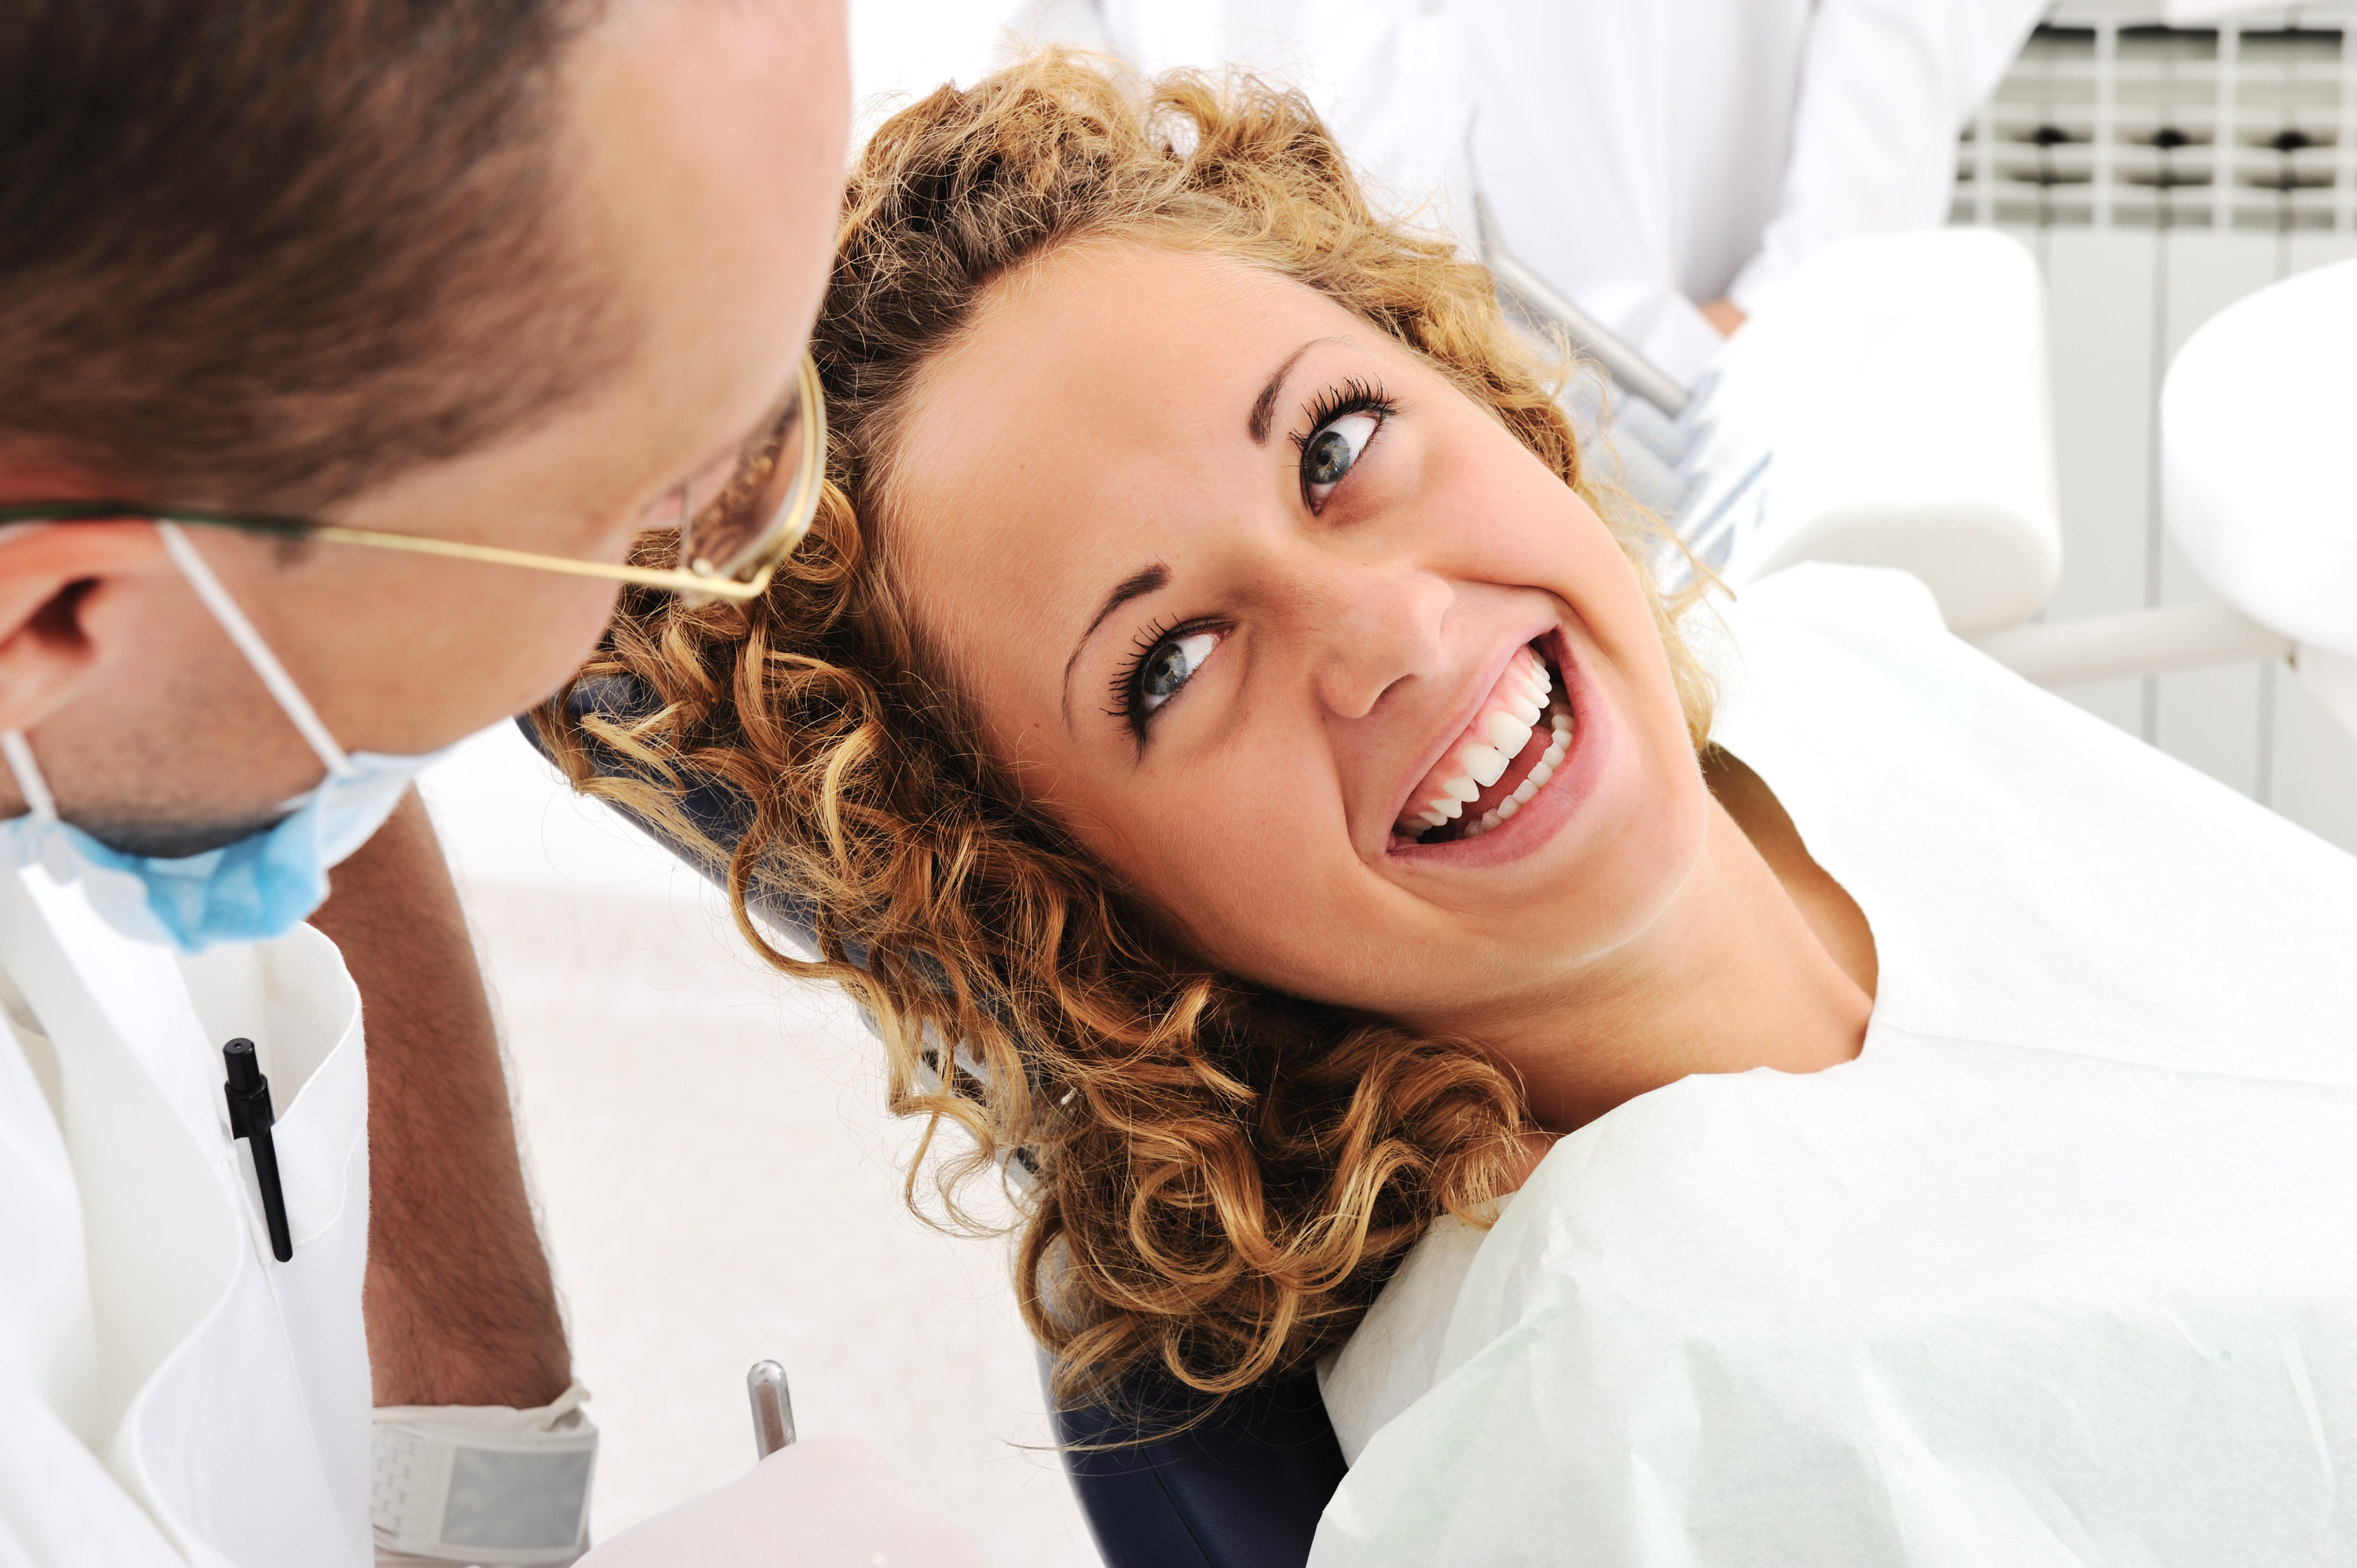 A woman laughing wheil talking with her dentist.